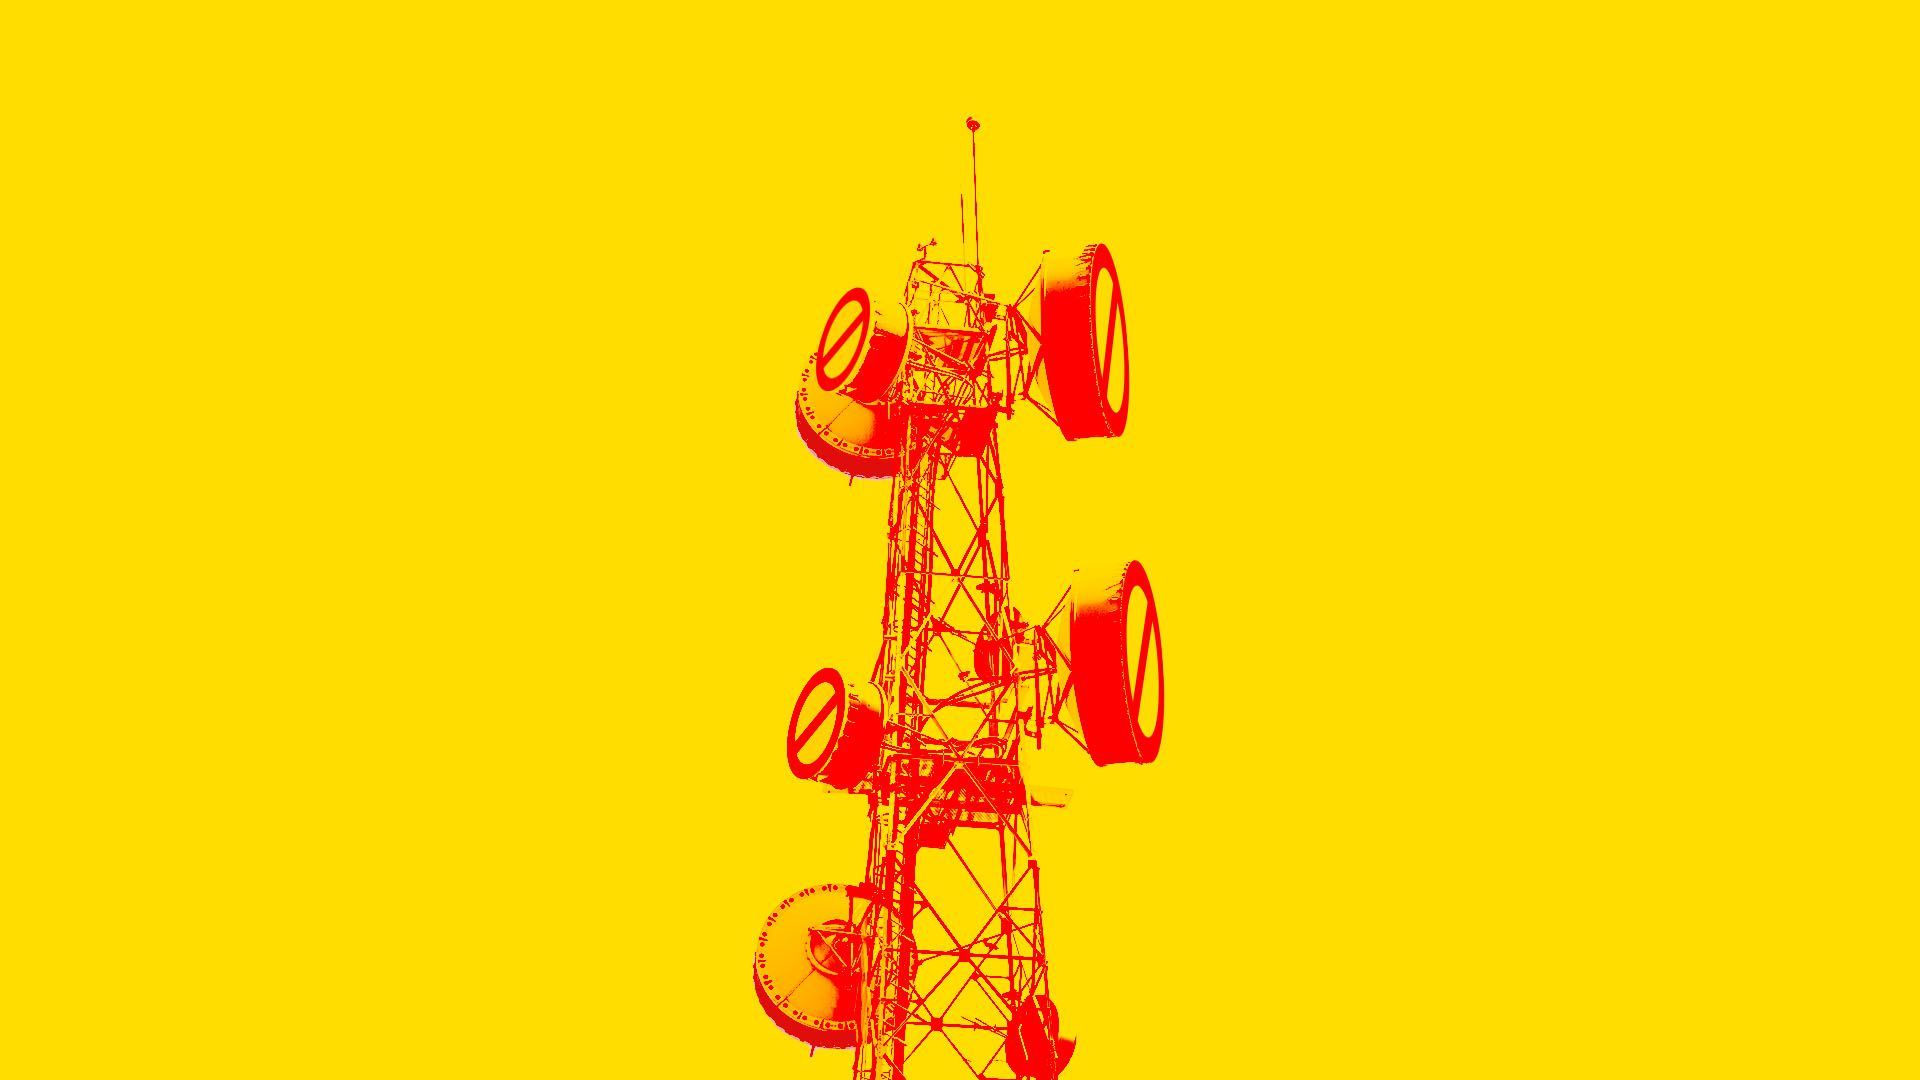 Illustration of a telecommunications tower with red "ban" signs over the satellite dishes